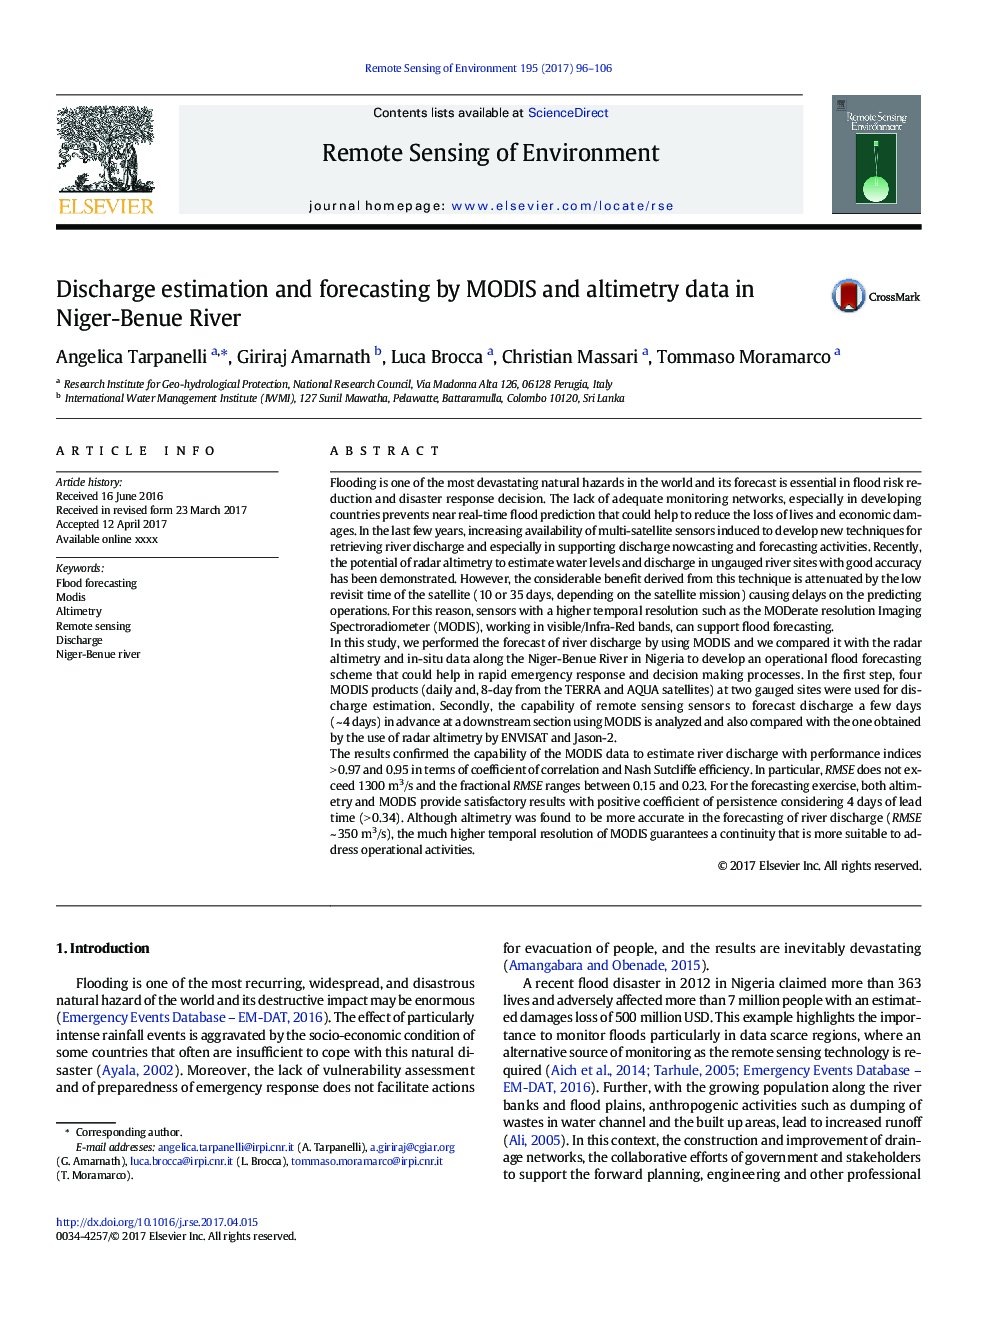 Discharge estimation and forecasting by MODIS and altimetry data in Niger-Benue River